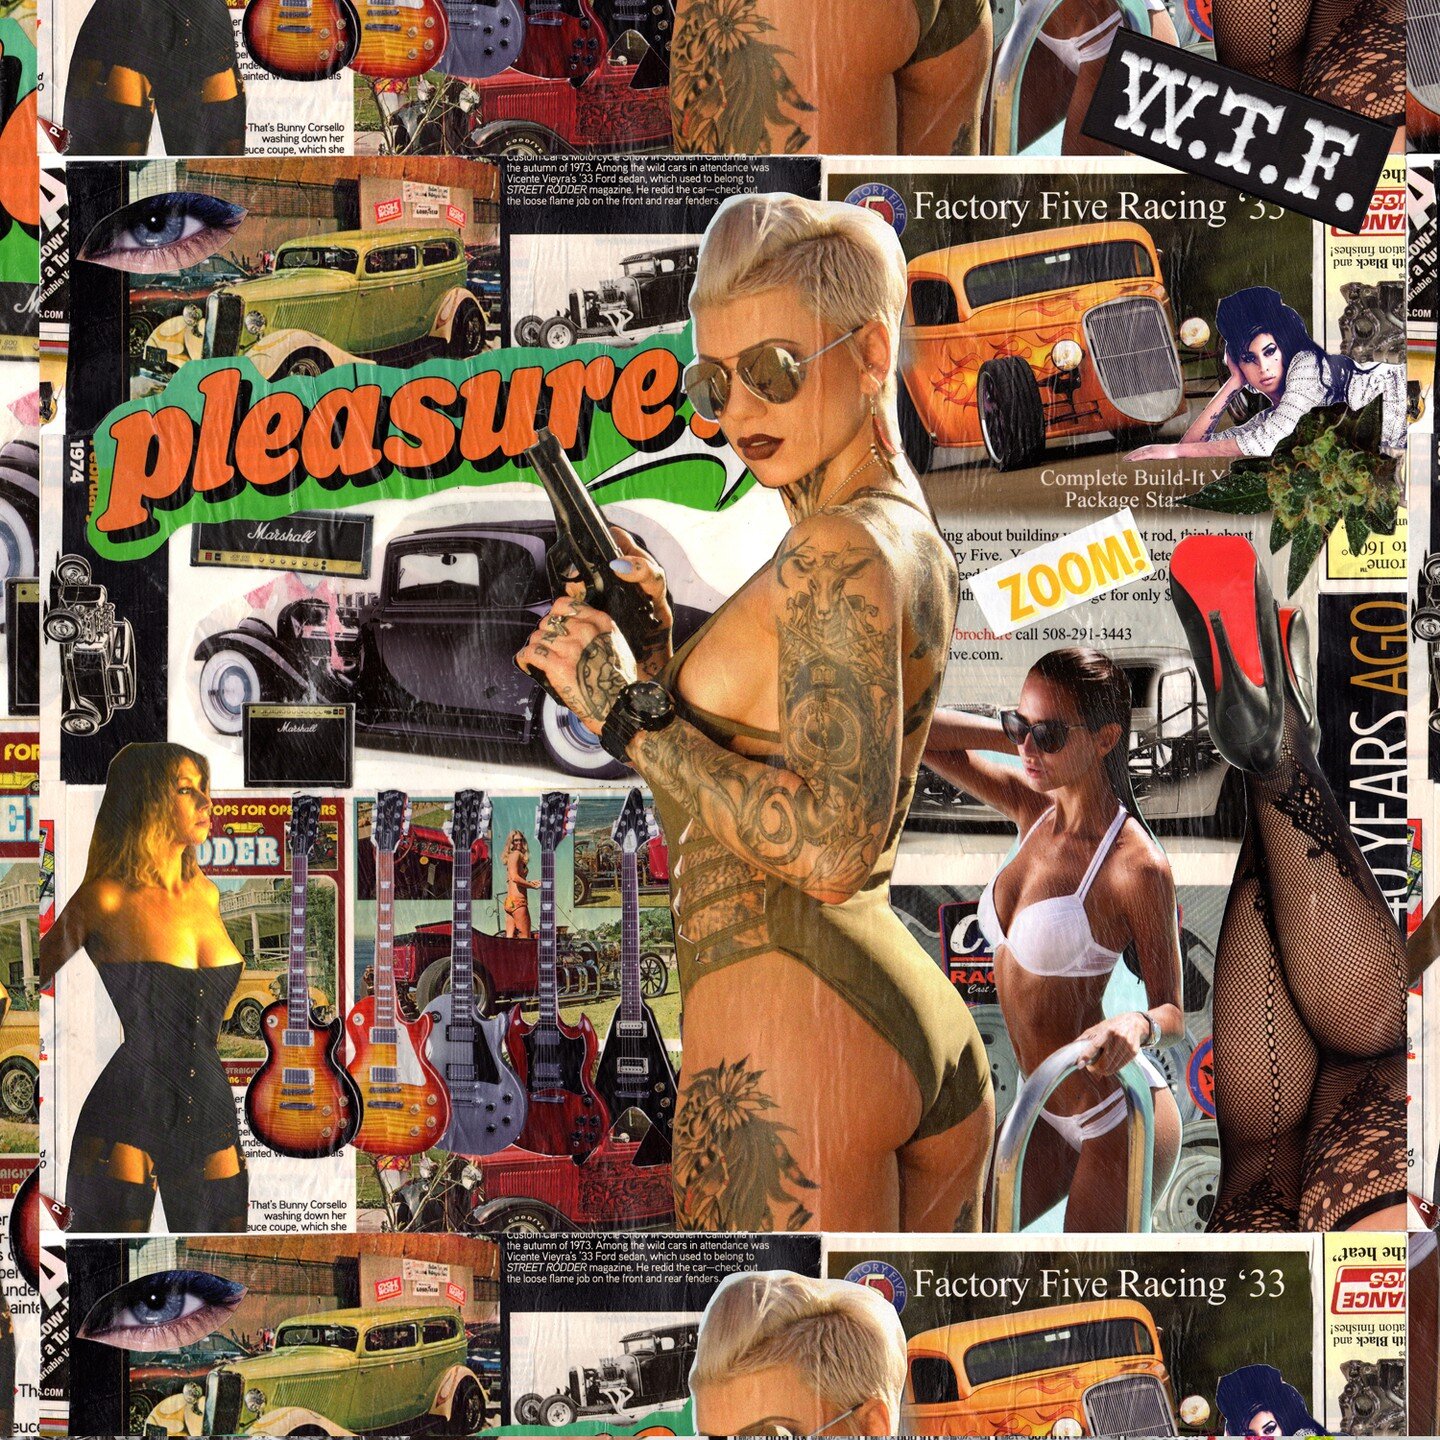 &quot;Pleasure Zoom!&quot; Models with hotrods, guns and guitars. Collage Art by Espo71. 
#collageart #collageartist #hotrods #models #gibsonguitars #dada #surrealism #cutups #absurdist_collageclub